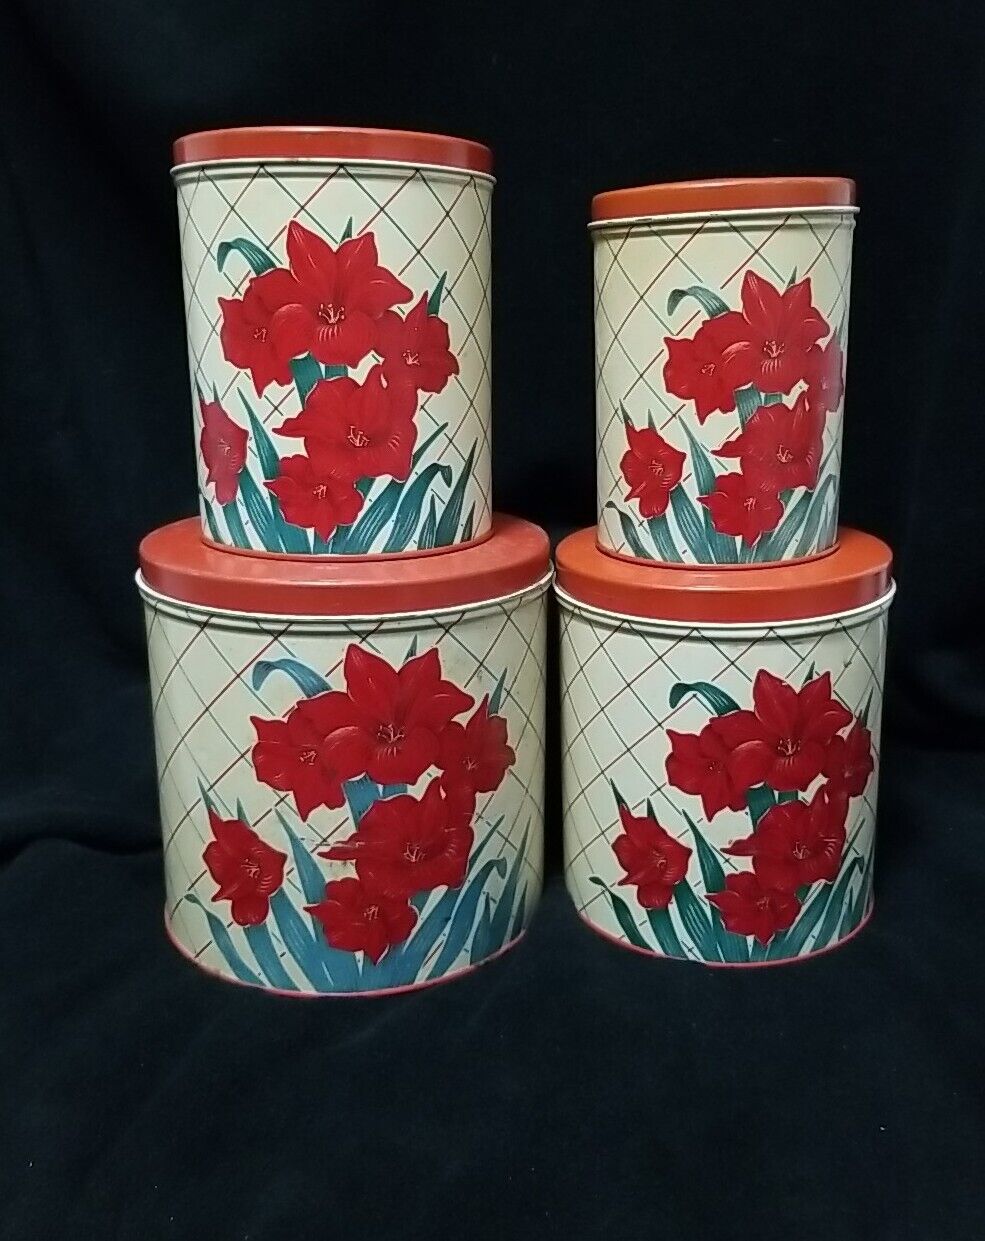 Vintage Canister Set Of 4 Red Amaryllis Flower Design  W/Cream, Red, Green Plaid